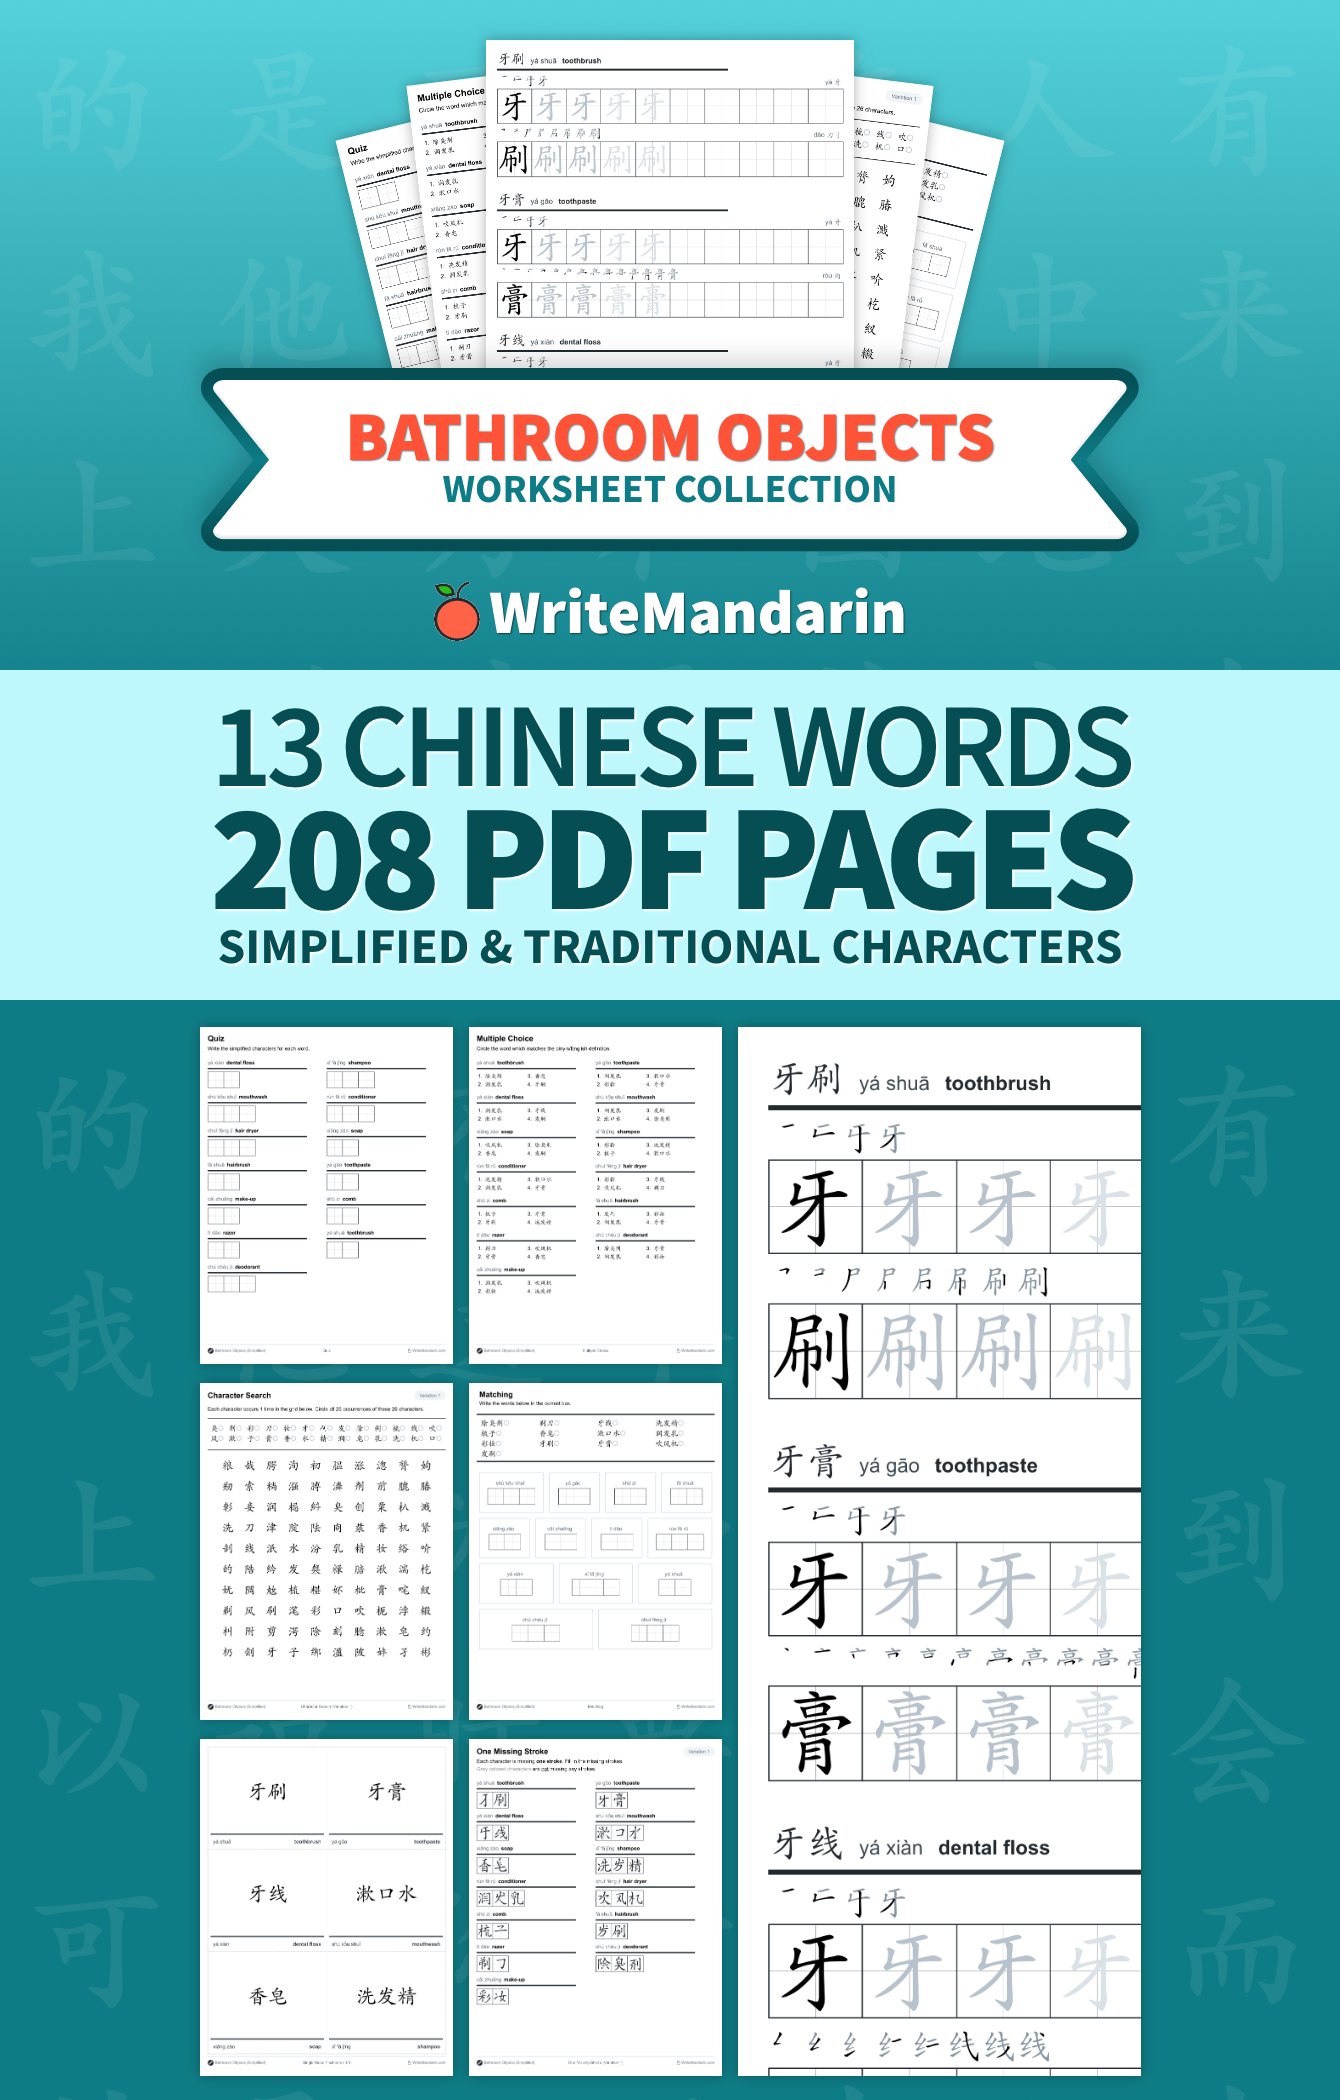 Preview image of Bathroom Objects worksheet collection